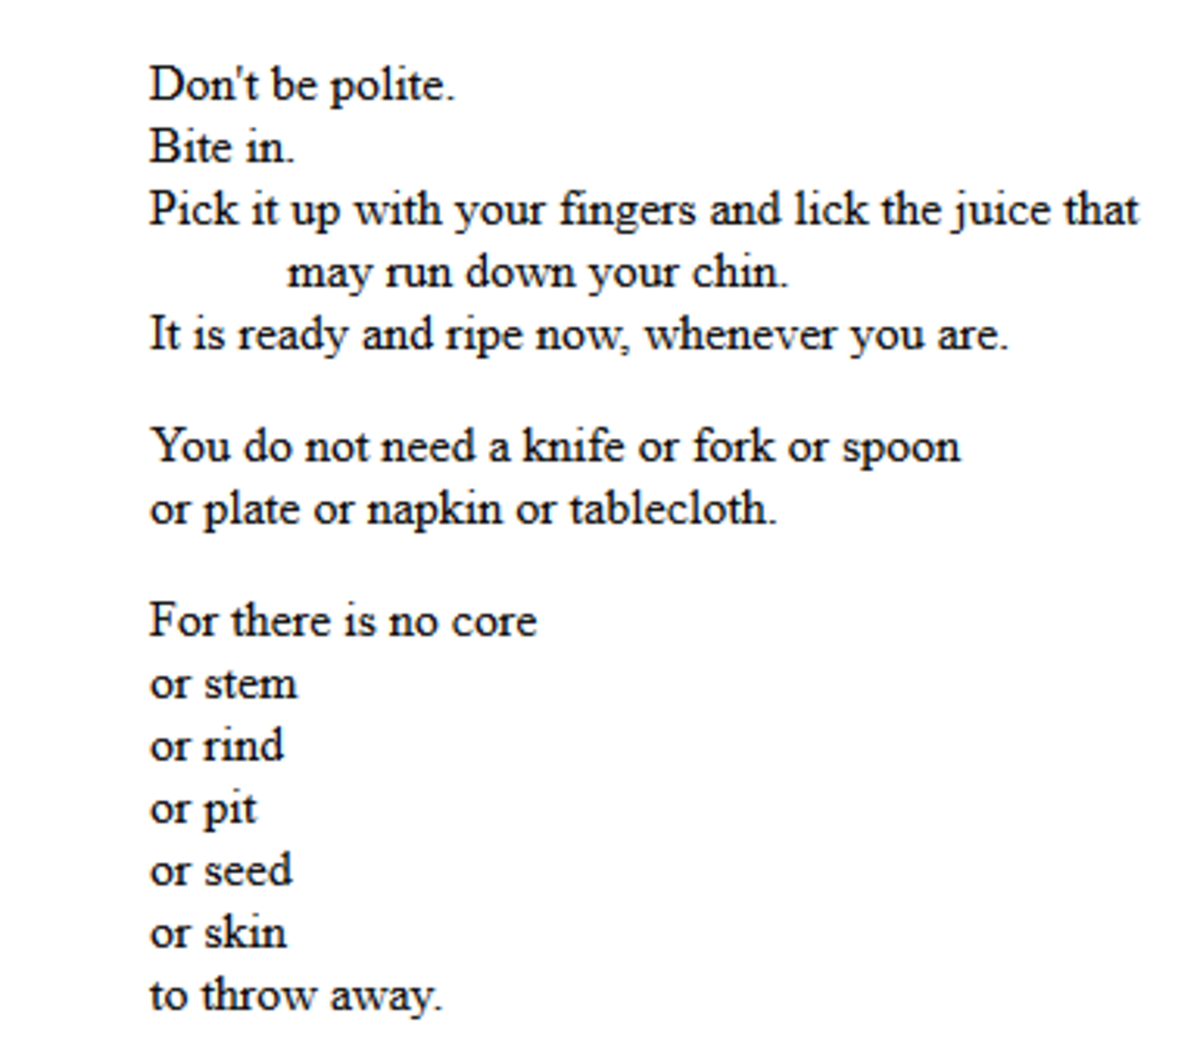 analysis-of-poem-how-to-eat-a-poem-by-eve-merriam